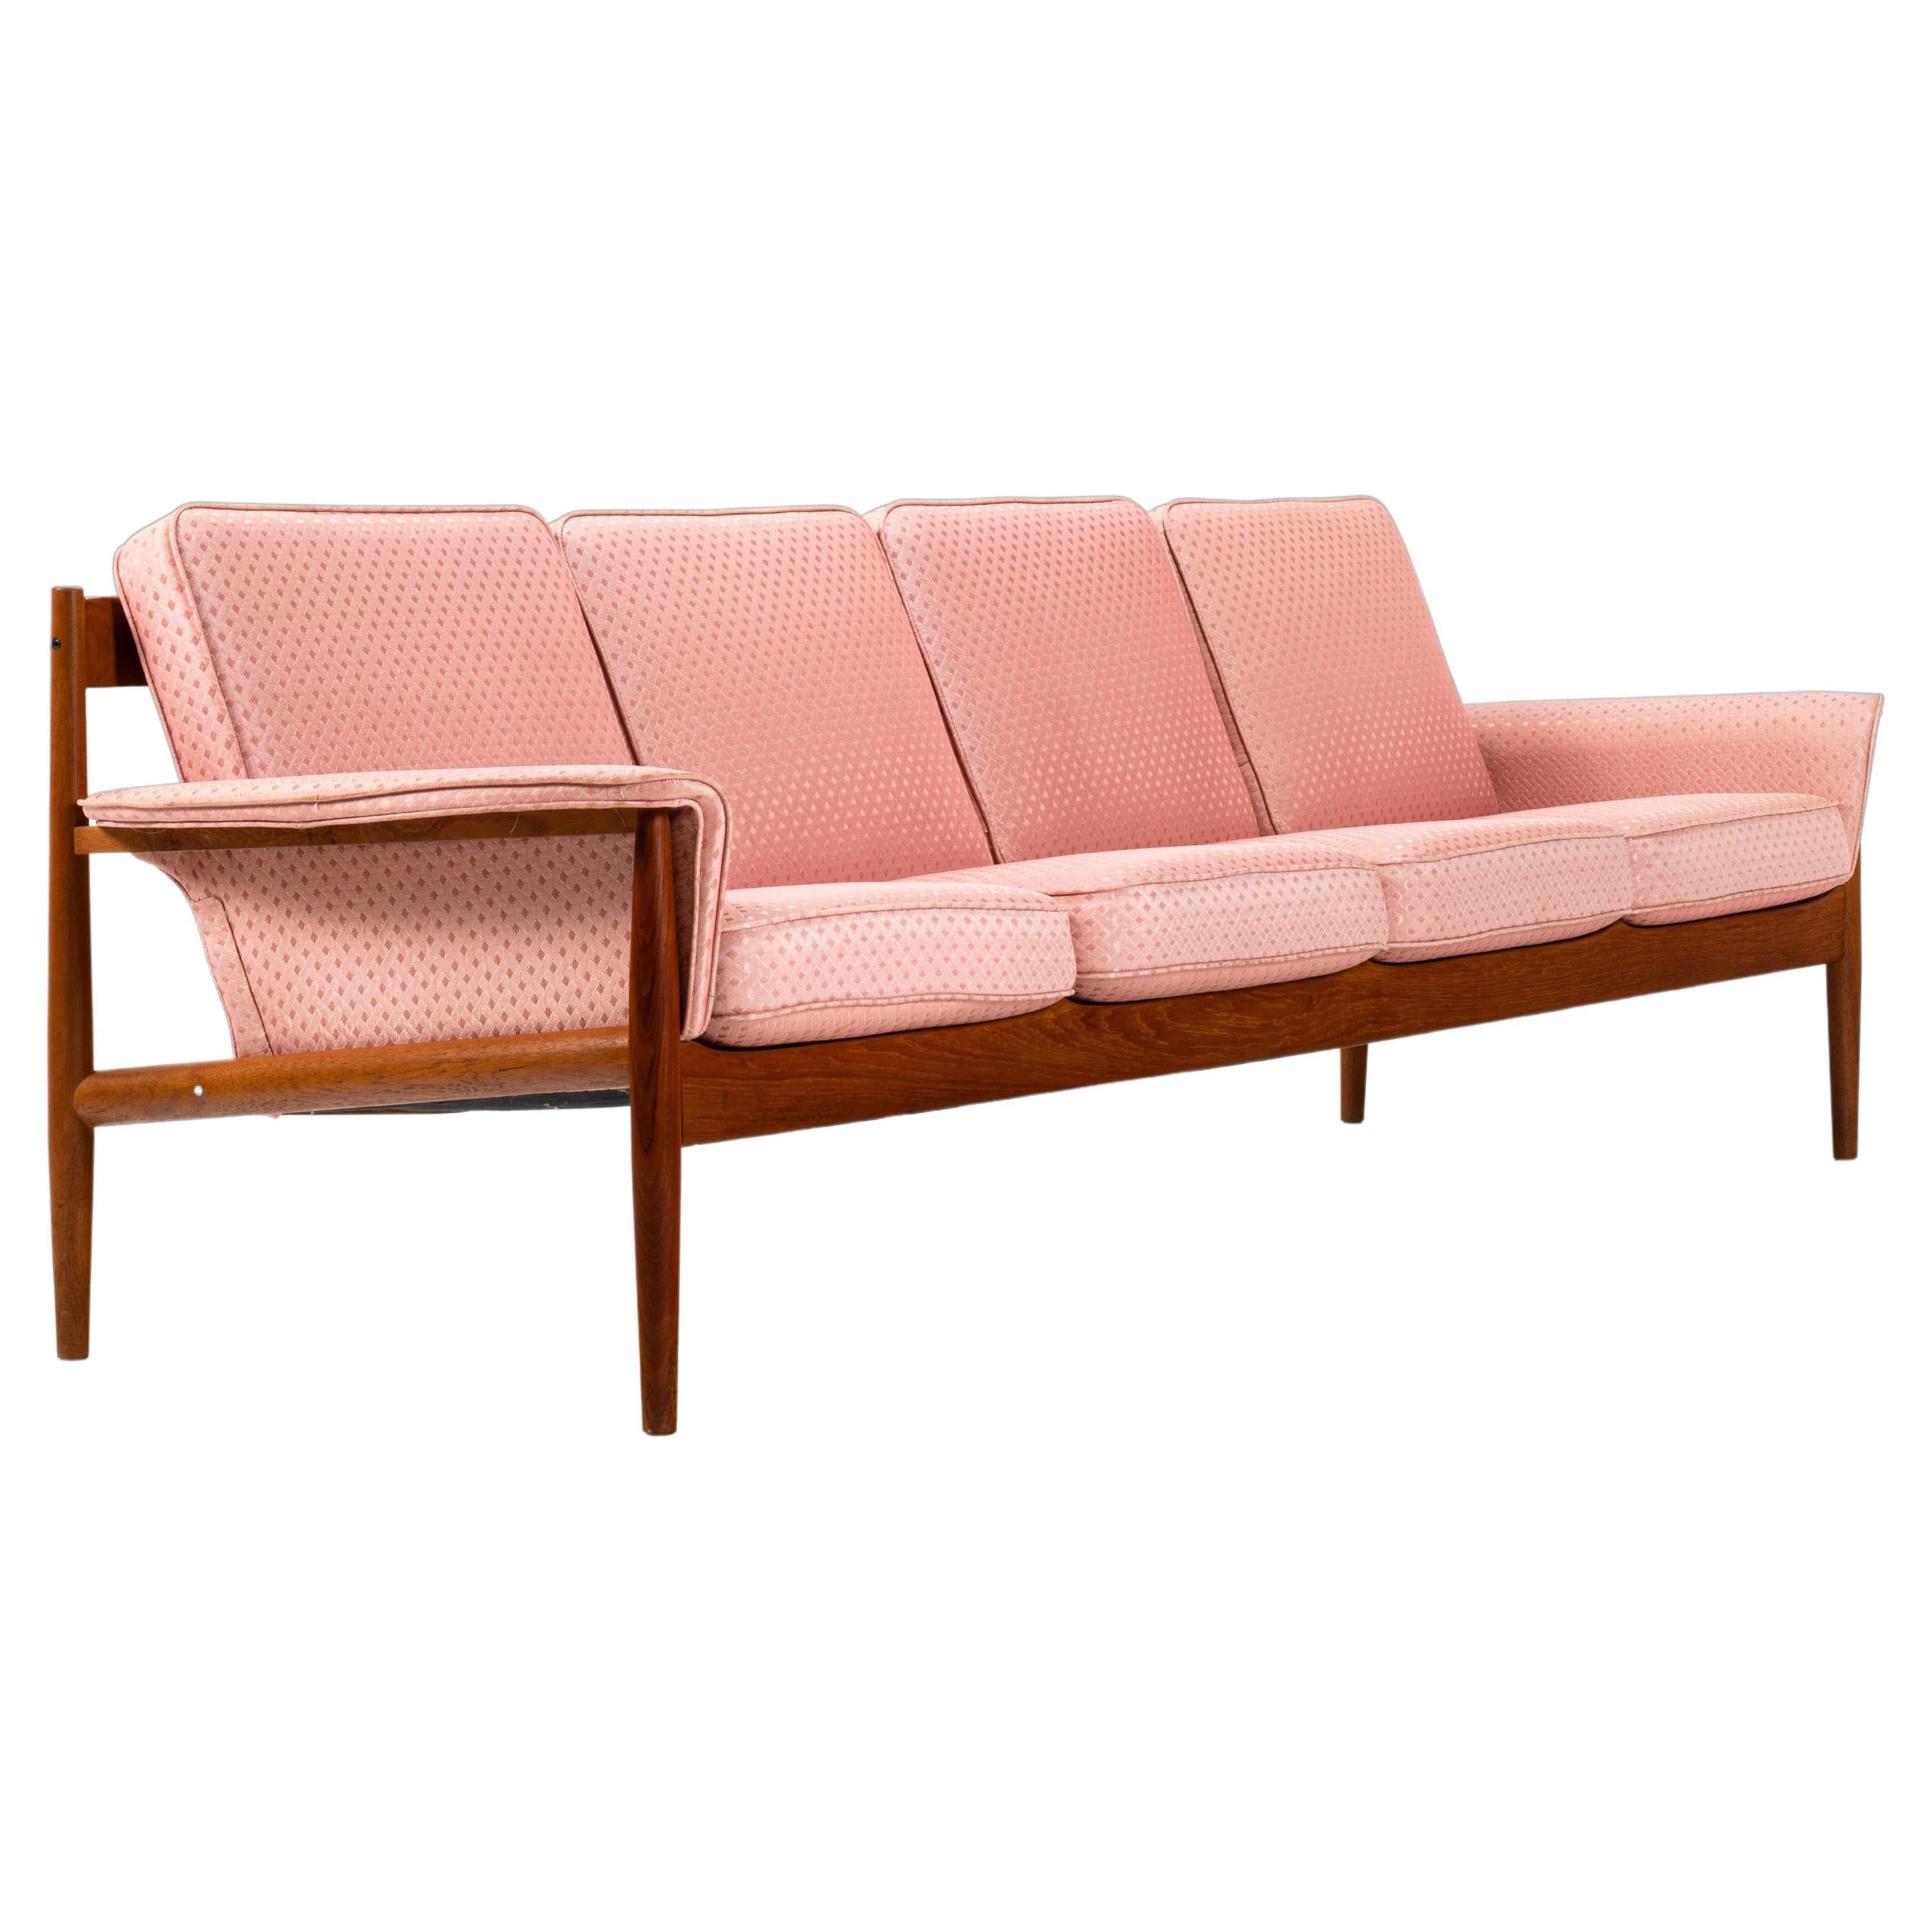 8 Ft. Long Four Seat Sofa by Grete Jalk for France and Sons in Teak, c. 1960s For Sale